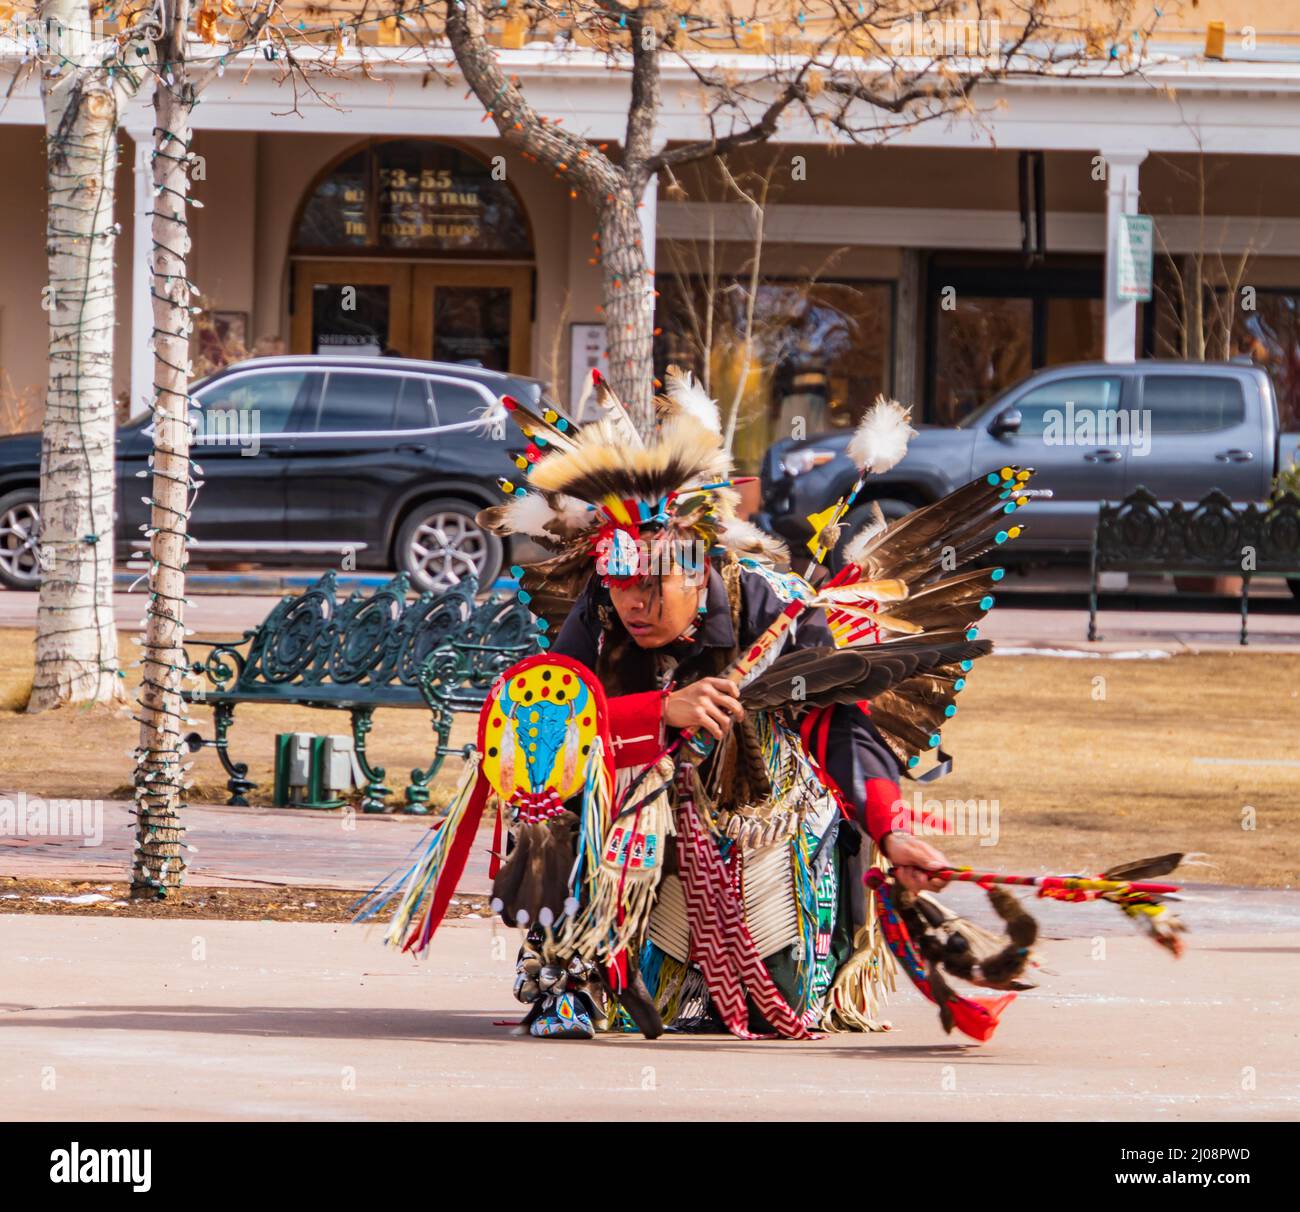 Santa Fe, New Mexico/USA- February 25, 2022: Indigenous native american dancer in traditional costume dancing at the Plaza Stock Photo